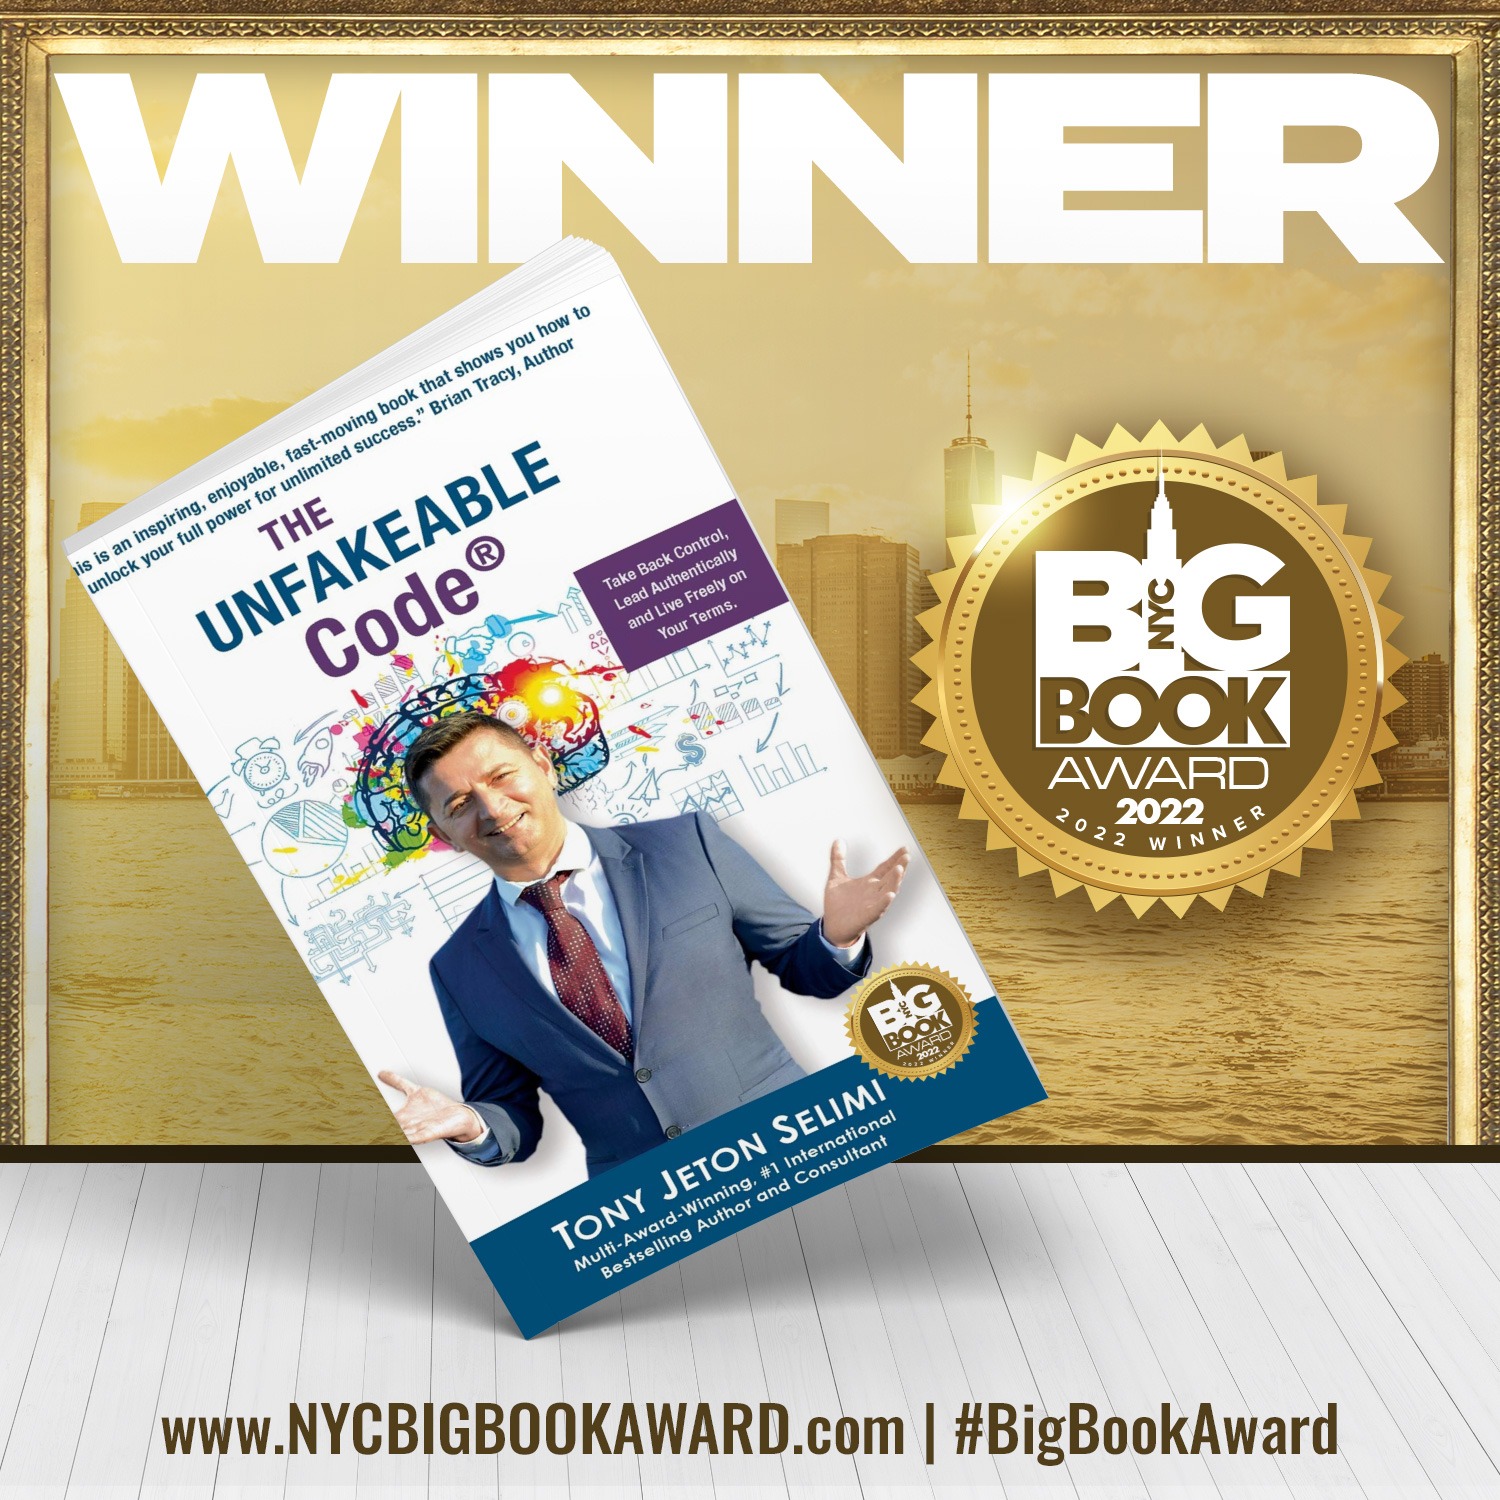 Overcome Imposter Syndrome & Achieve Excellence With This Award-Winning Book